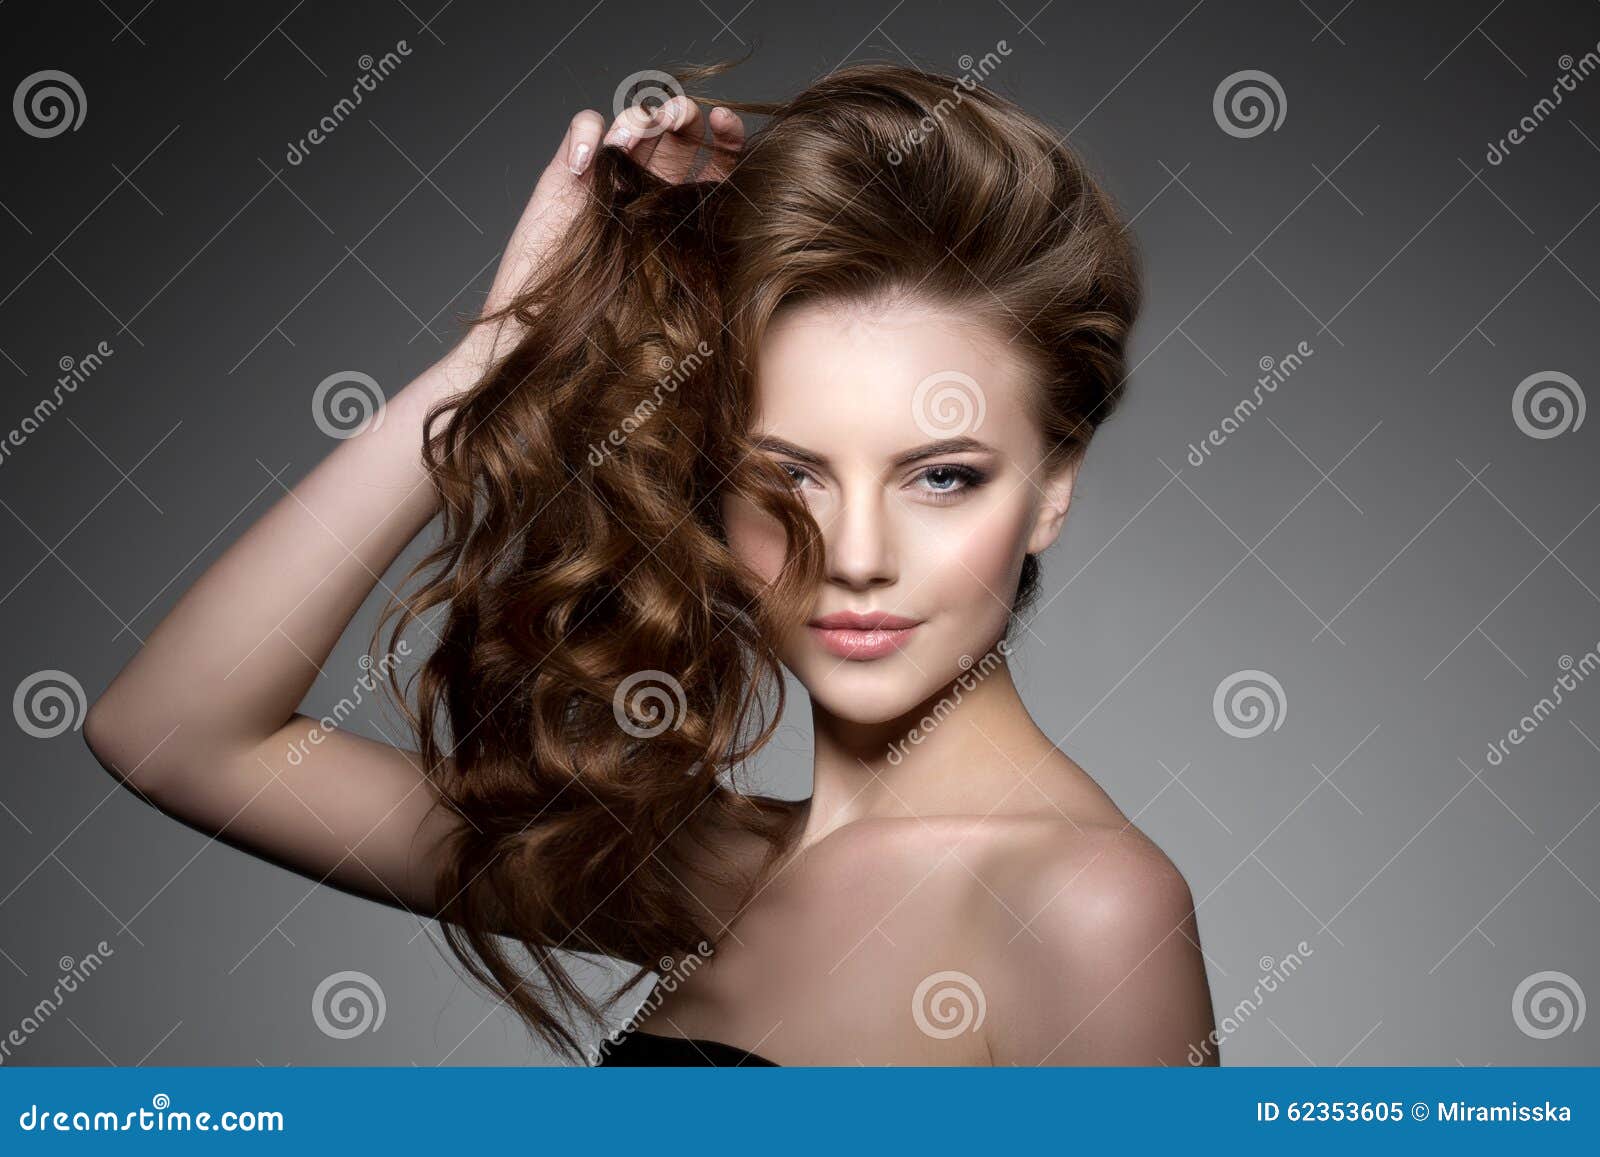 model with long hair. waves curls hairstyle. hair salon. updo. f